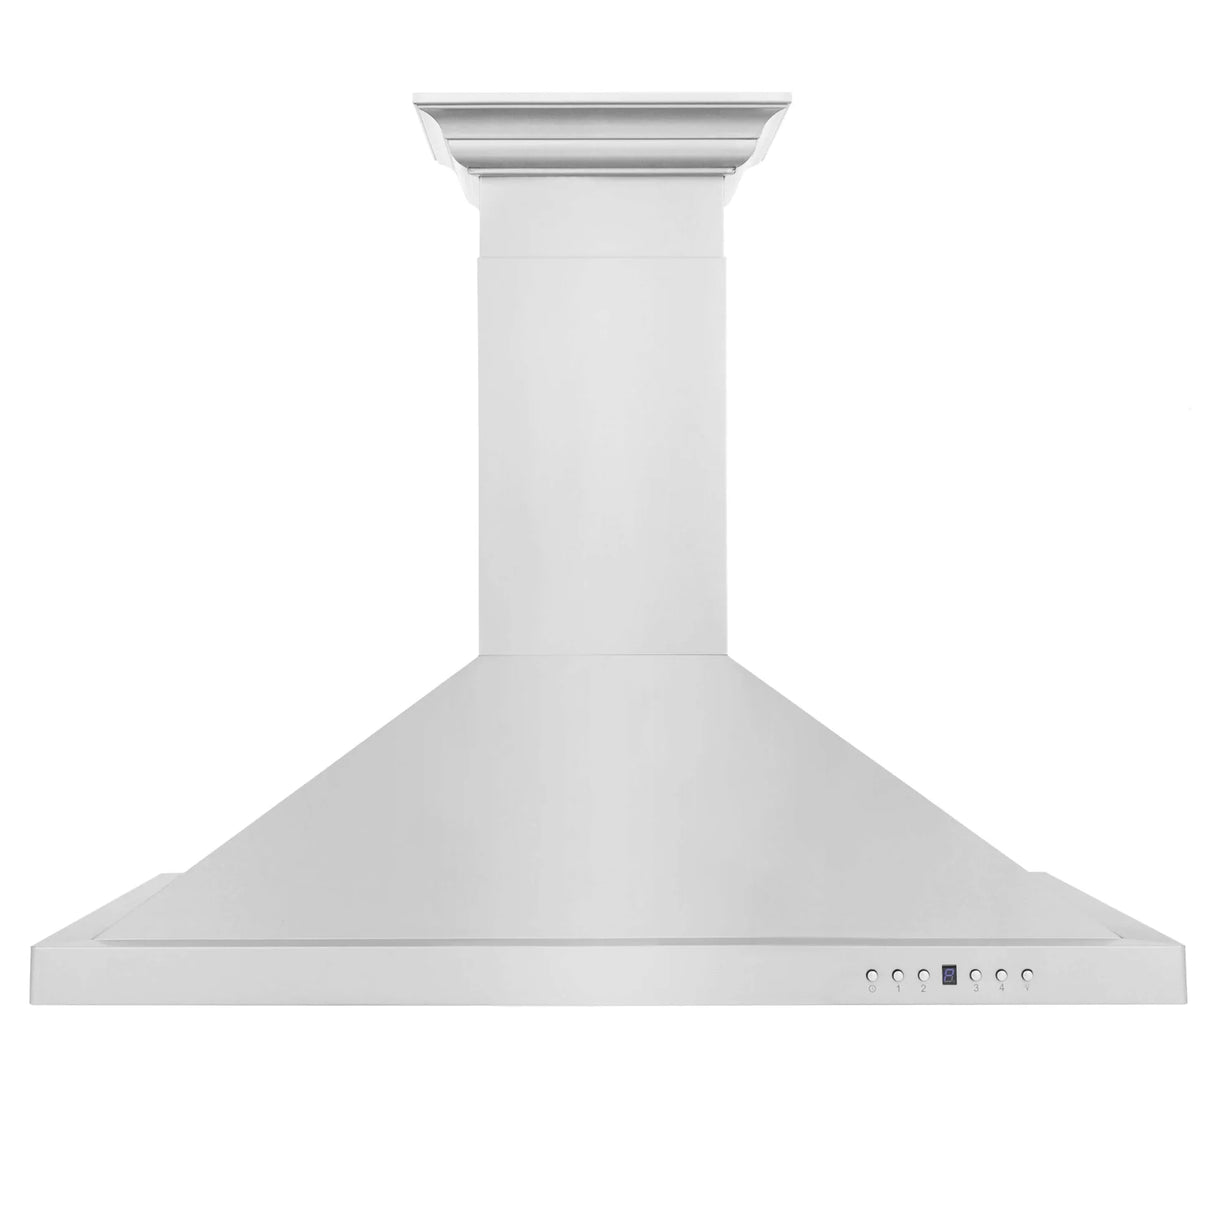 ZLINE 30" Convertible Vent Wall Mount Range Hood in Stainless Steel with Crown Molding